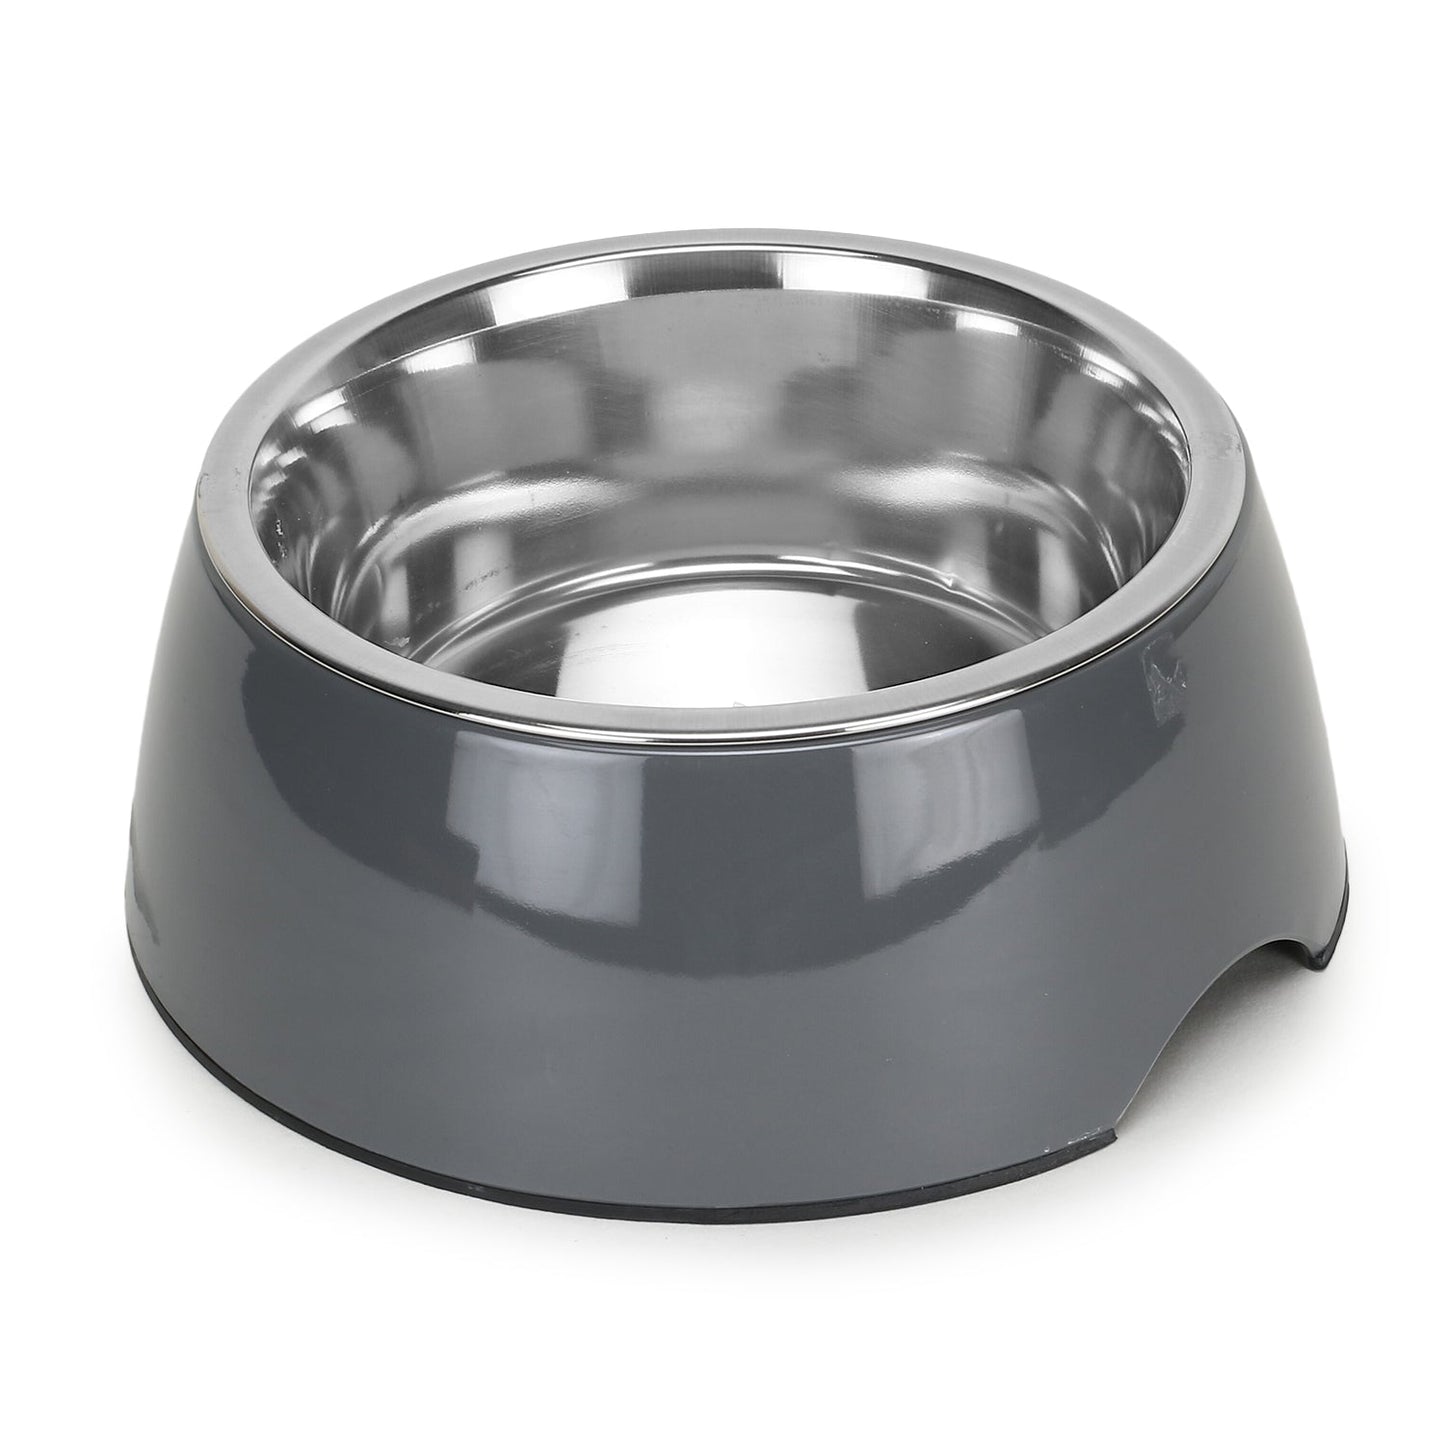 Basil Solid Grey Pet Feeding Bowl Set, Melamine and Stainless Steel